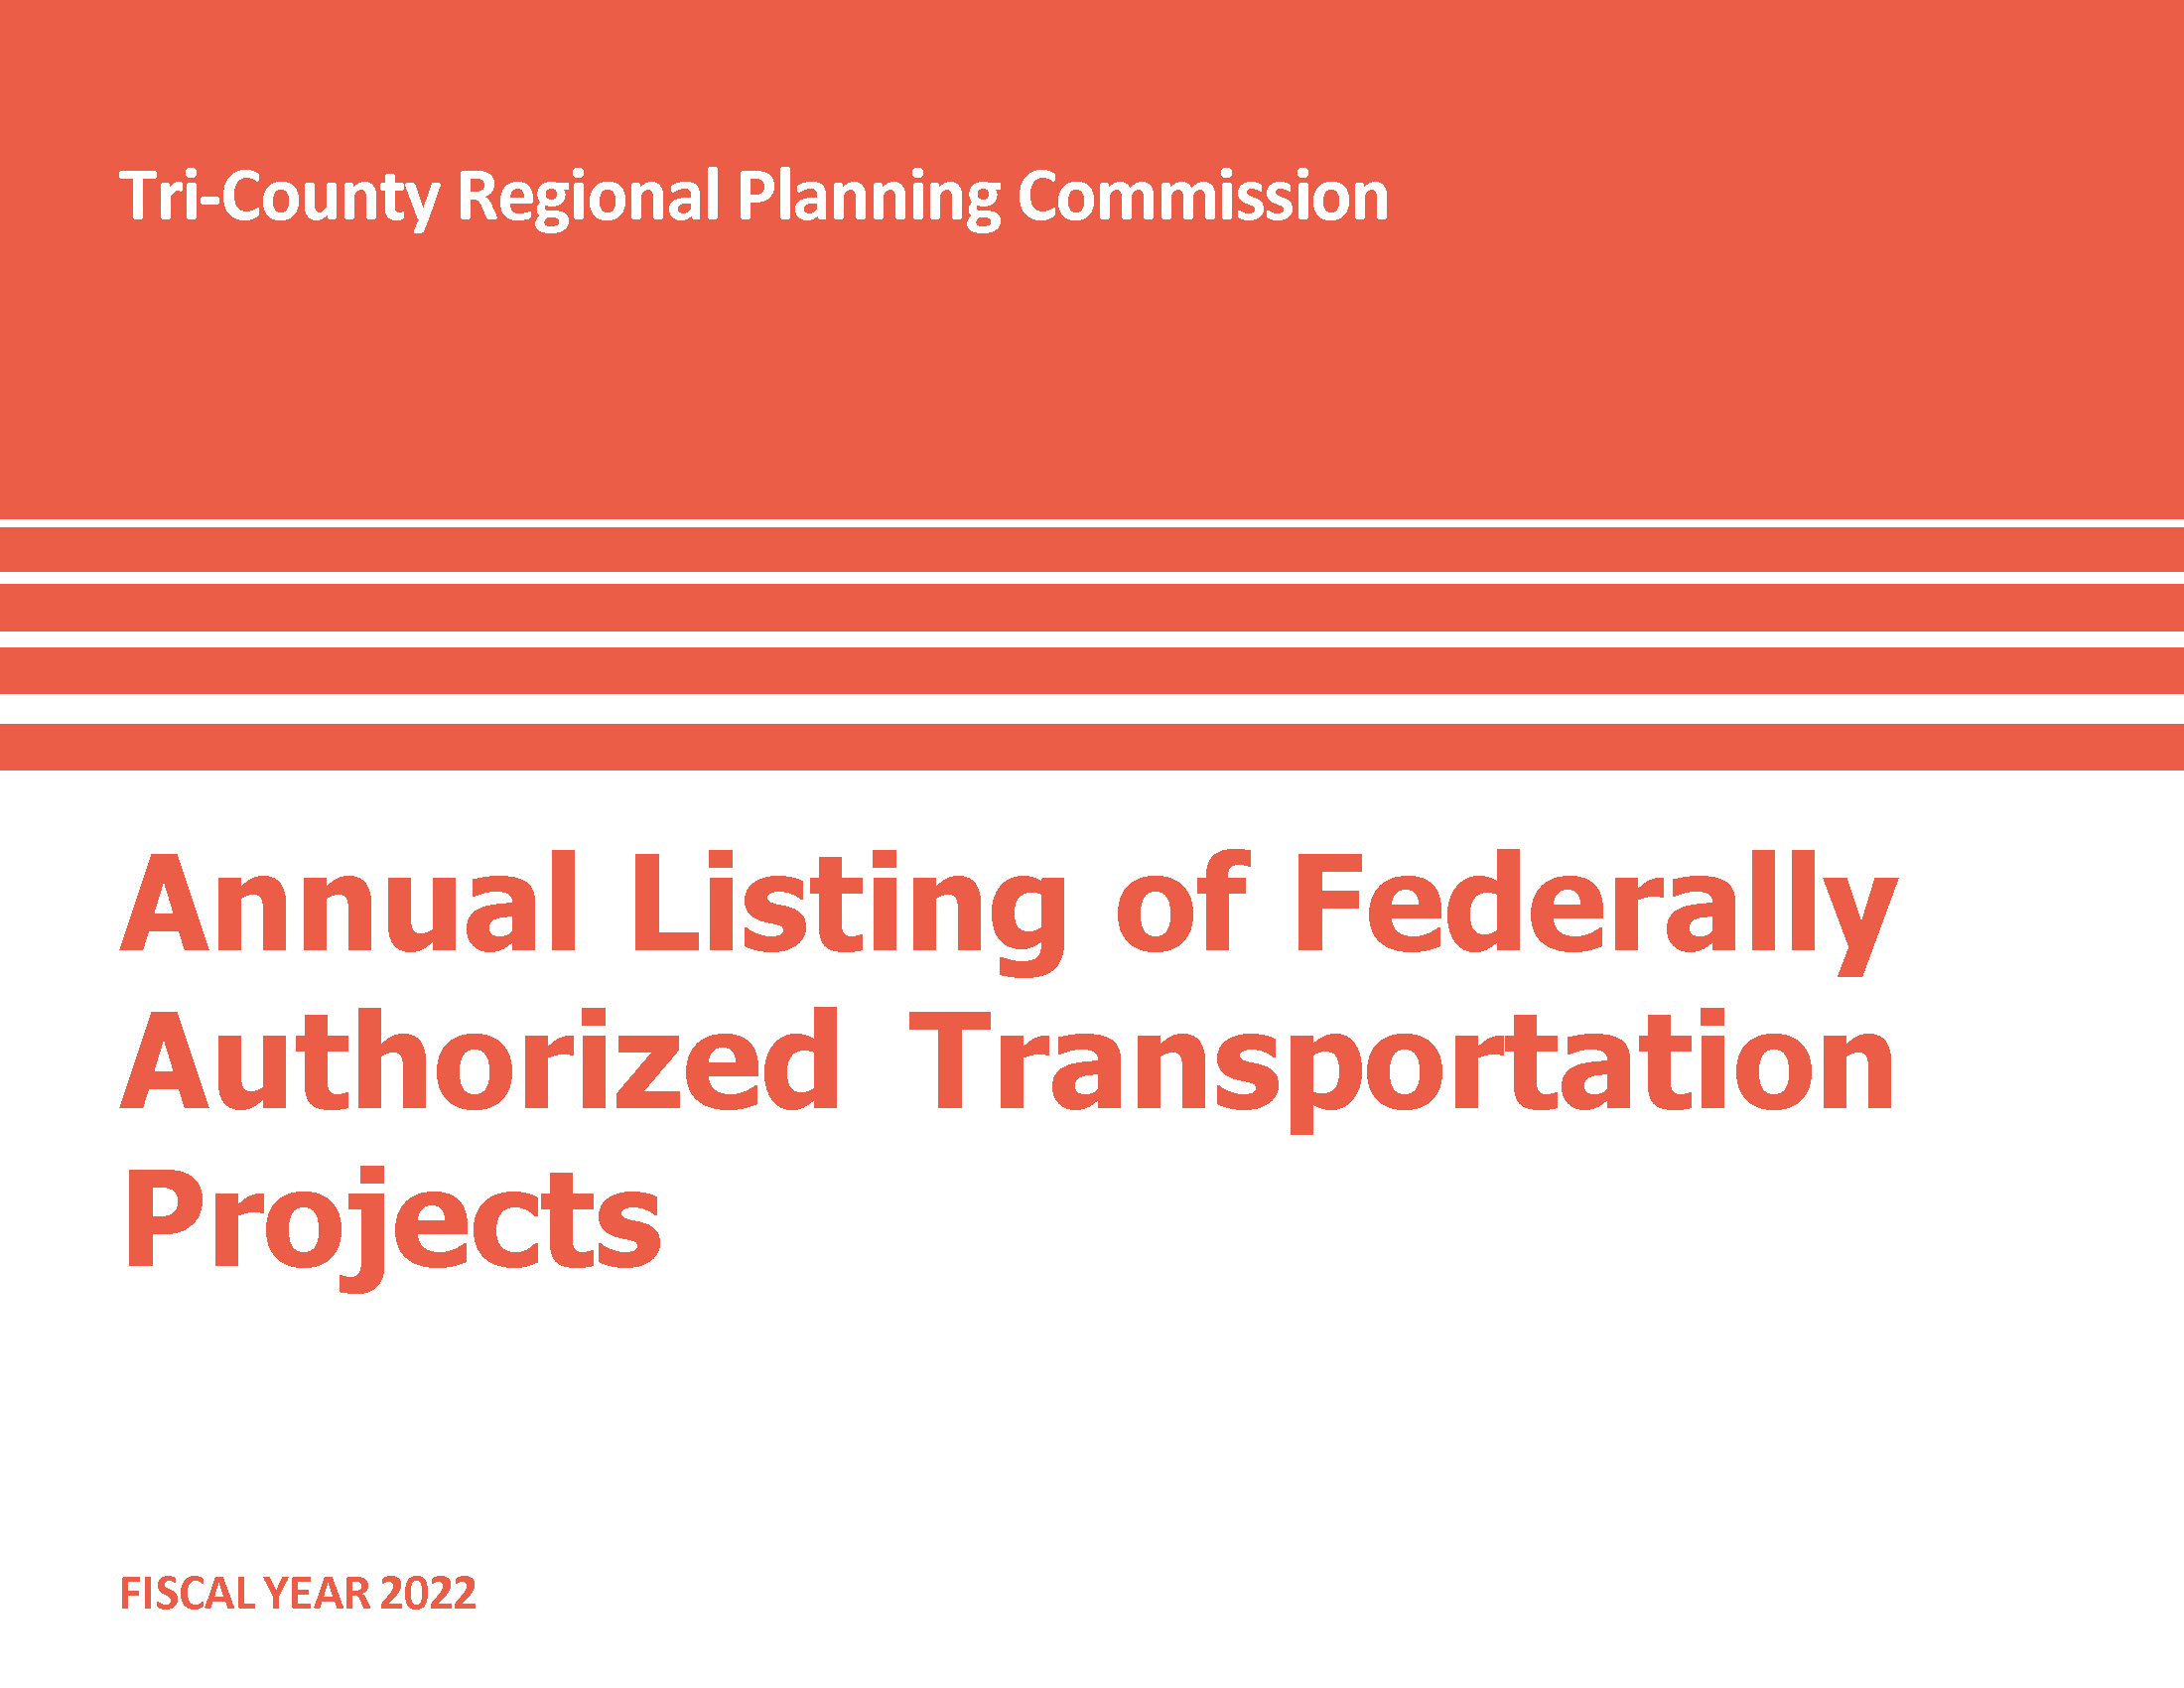 Annual Listing of Federally Authorized Transportation Projects